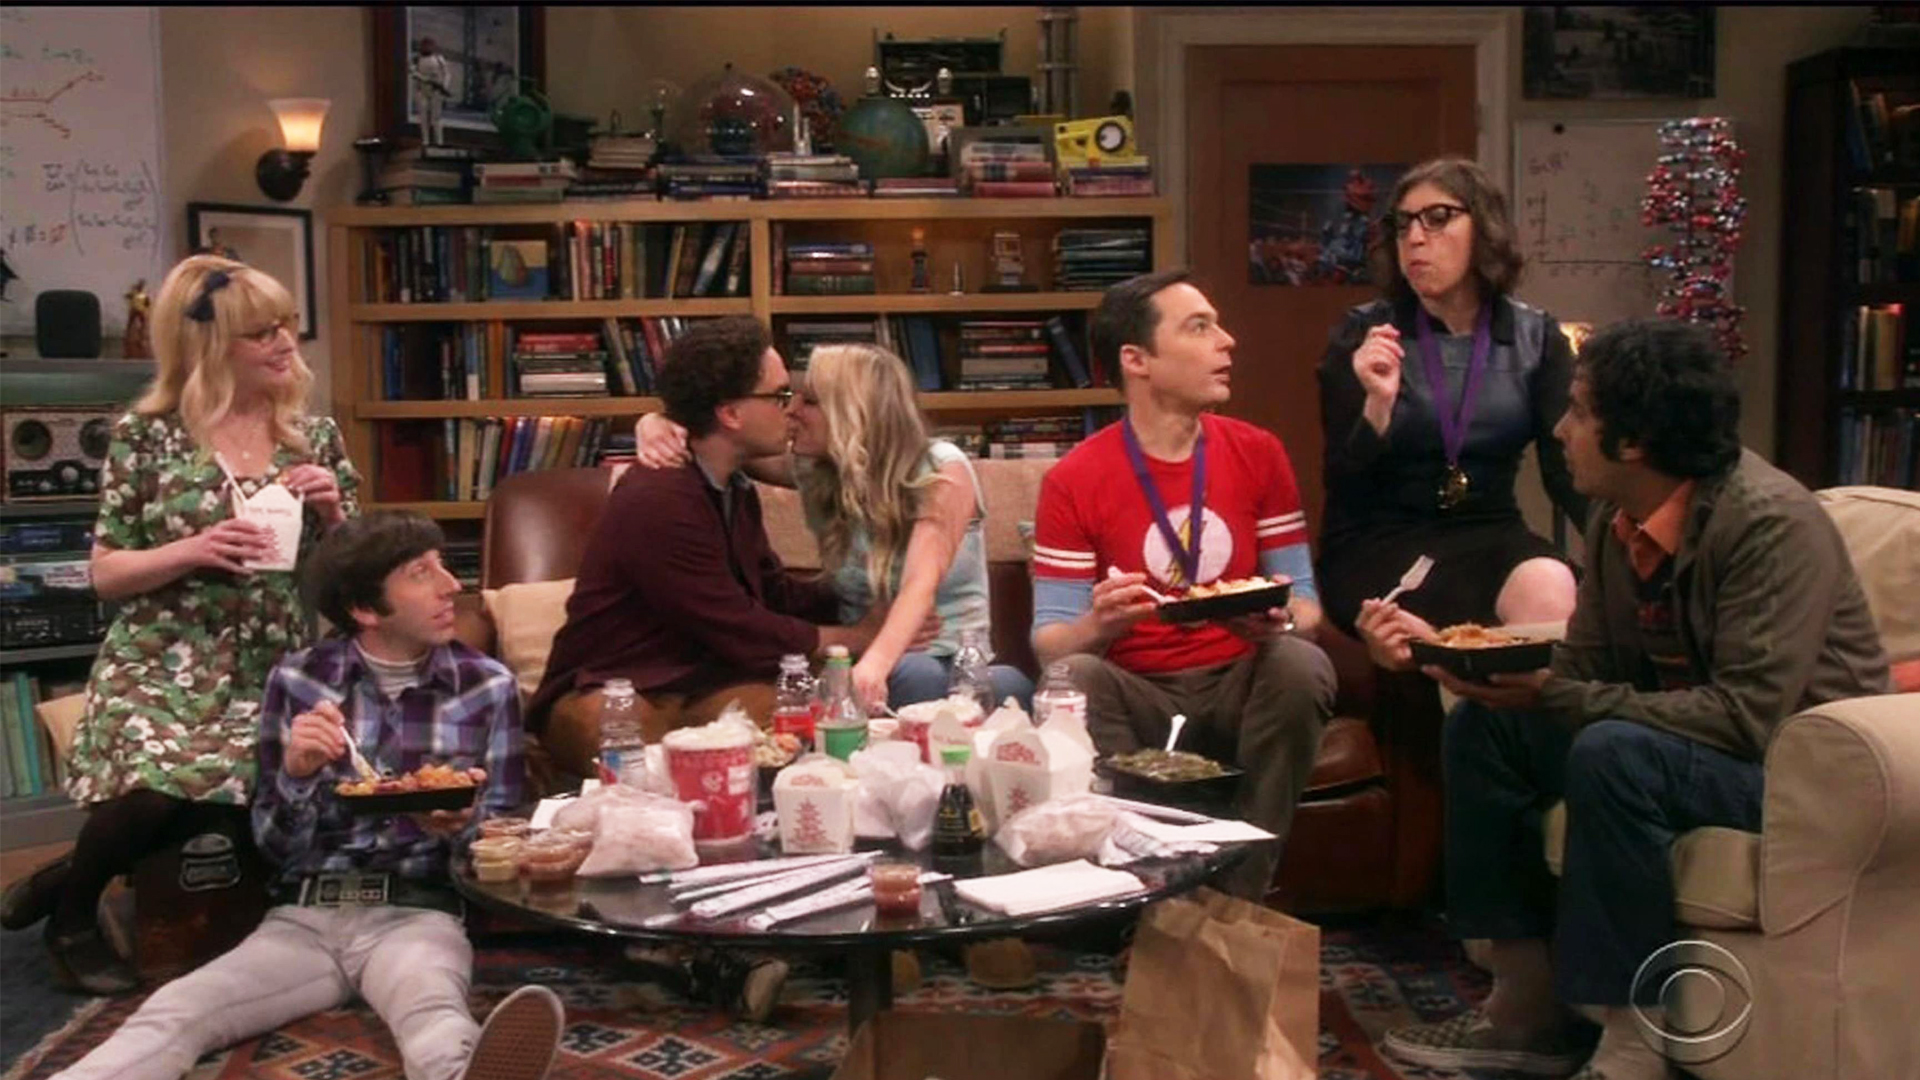 10 Big Bang Theory Details That Will Make You Want To Rewatch Immediately